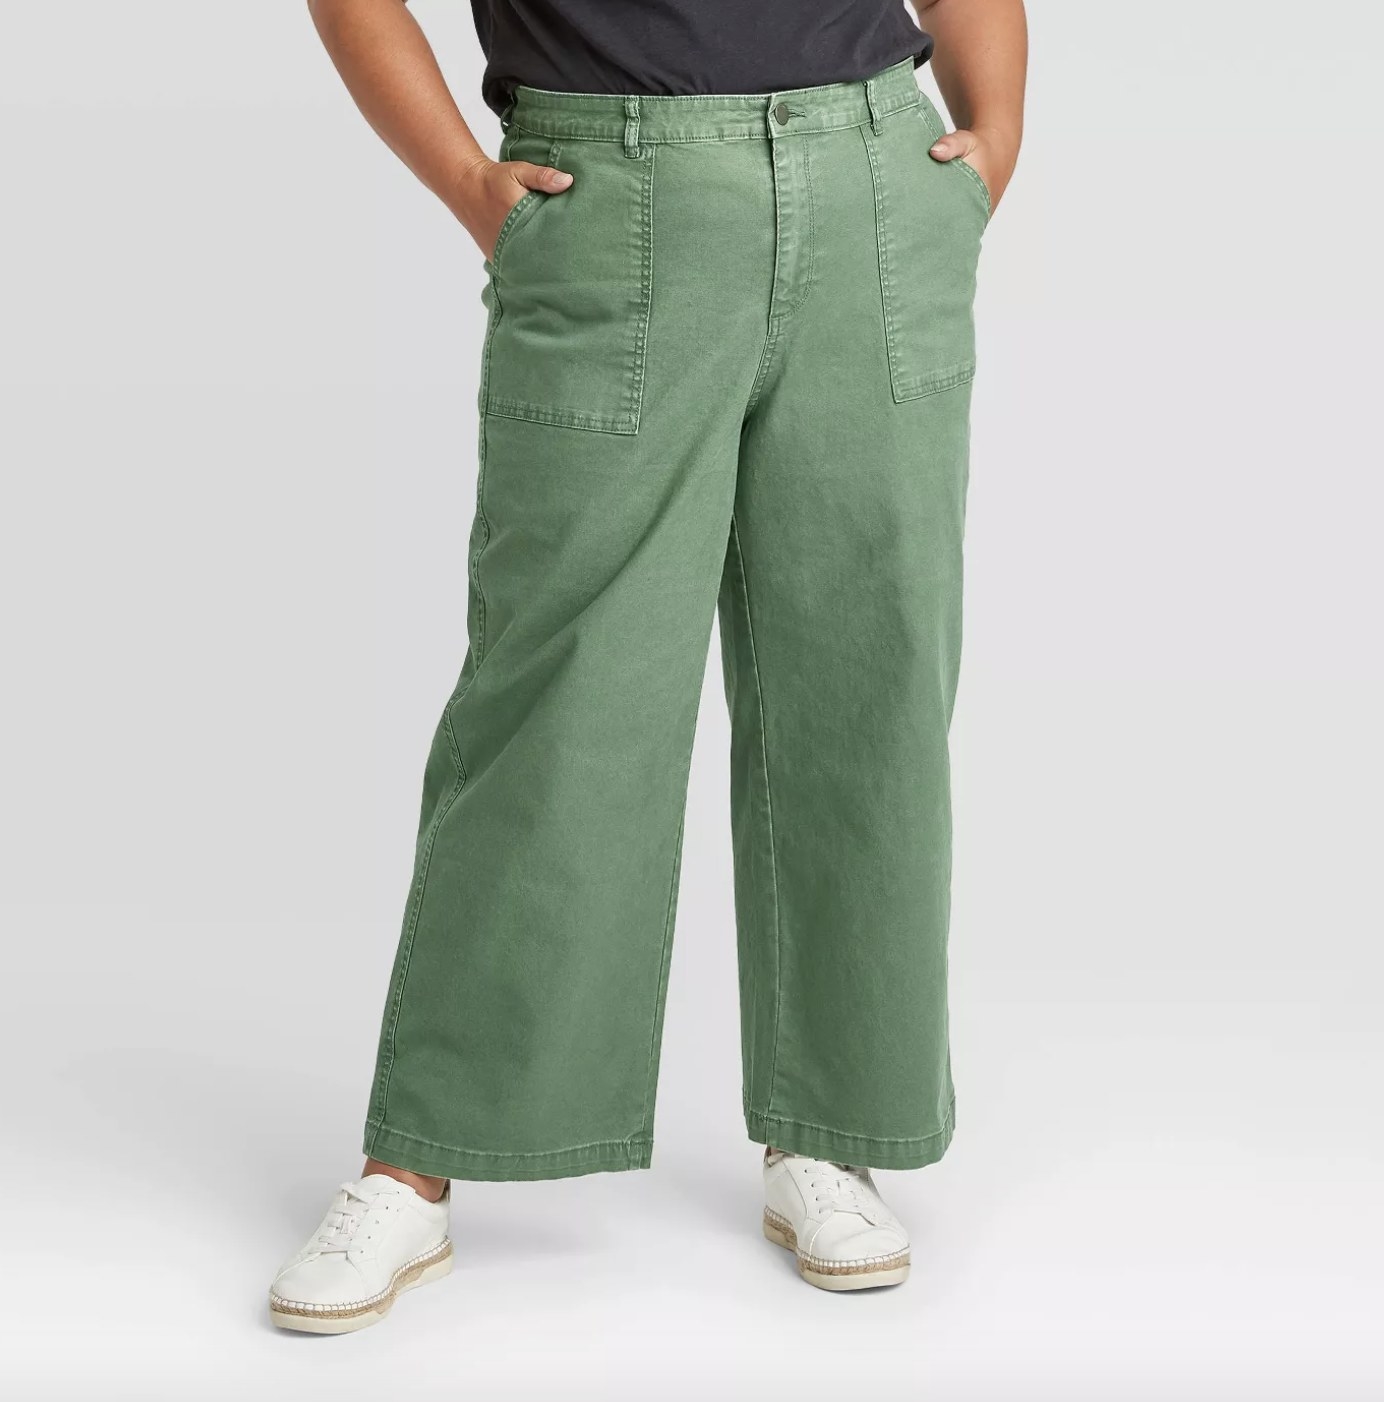 the pants in green